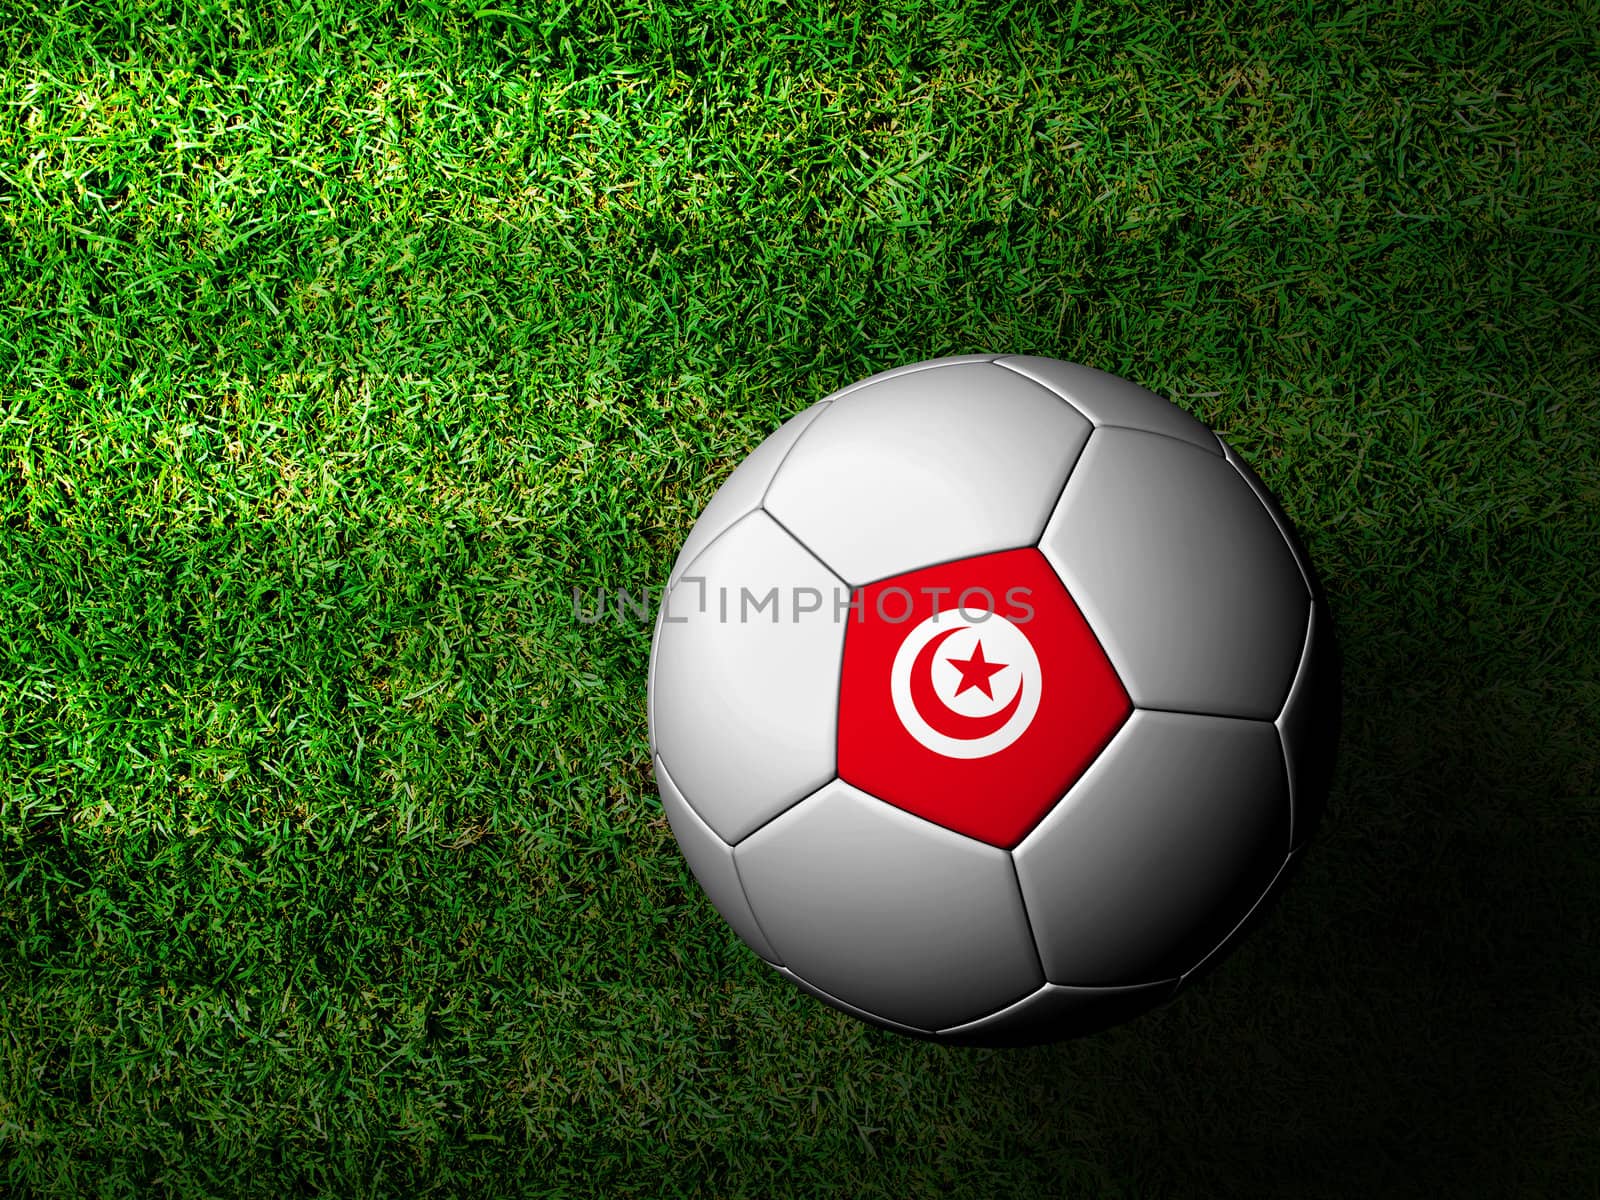 Tunisia Flag Pattern 3d rendering of a soccer ball in green grass